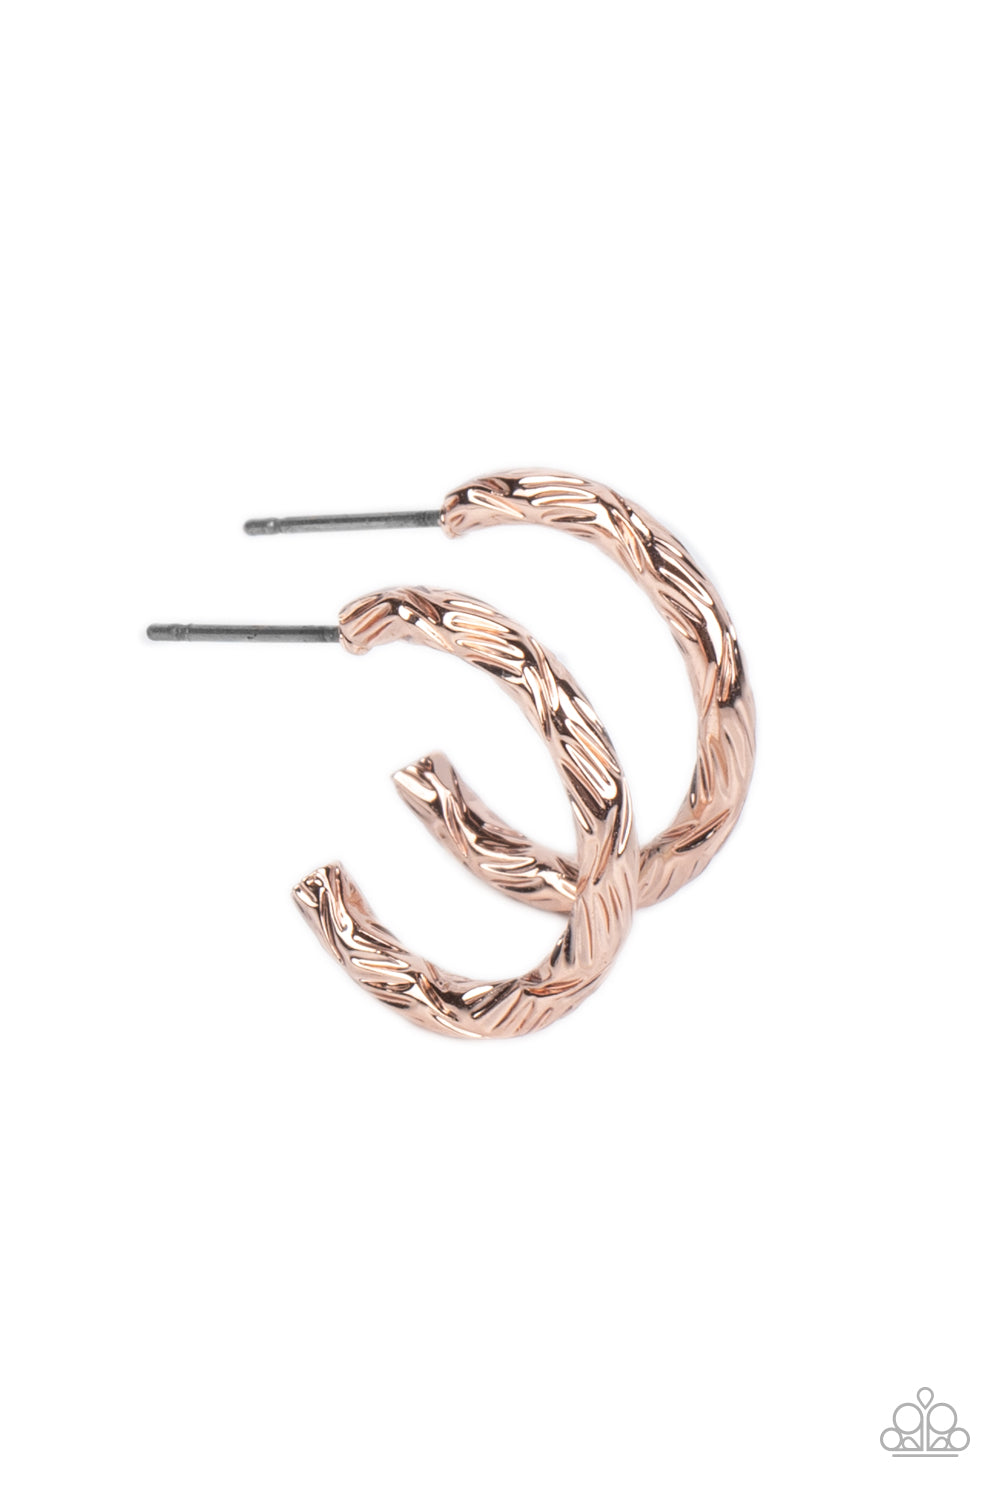 Triumphantly Textured - Rose Gold (Post) Earring